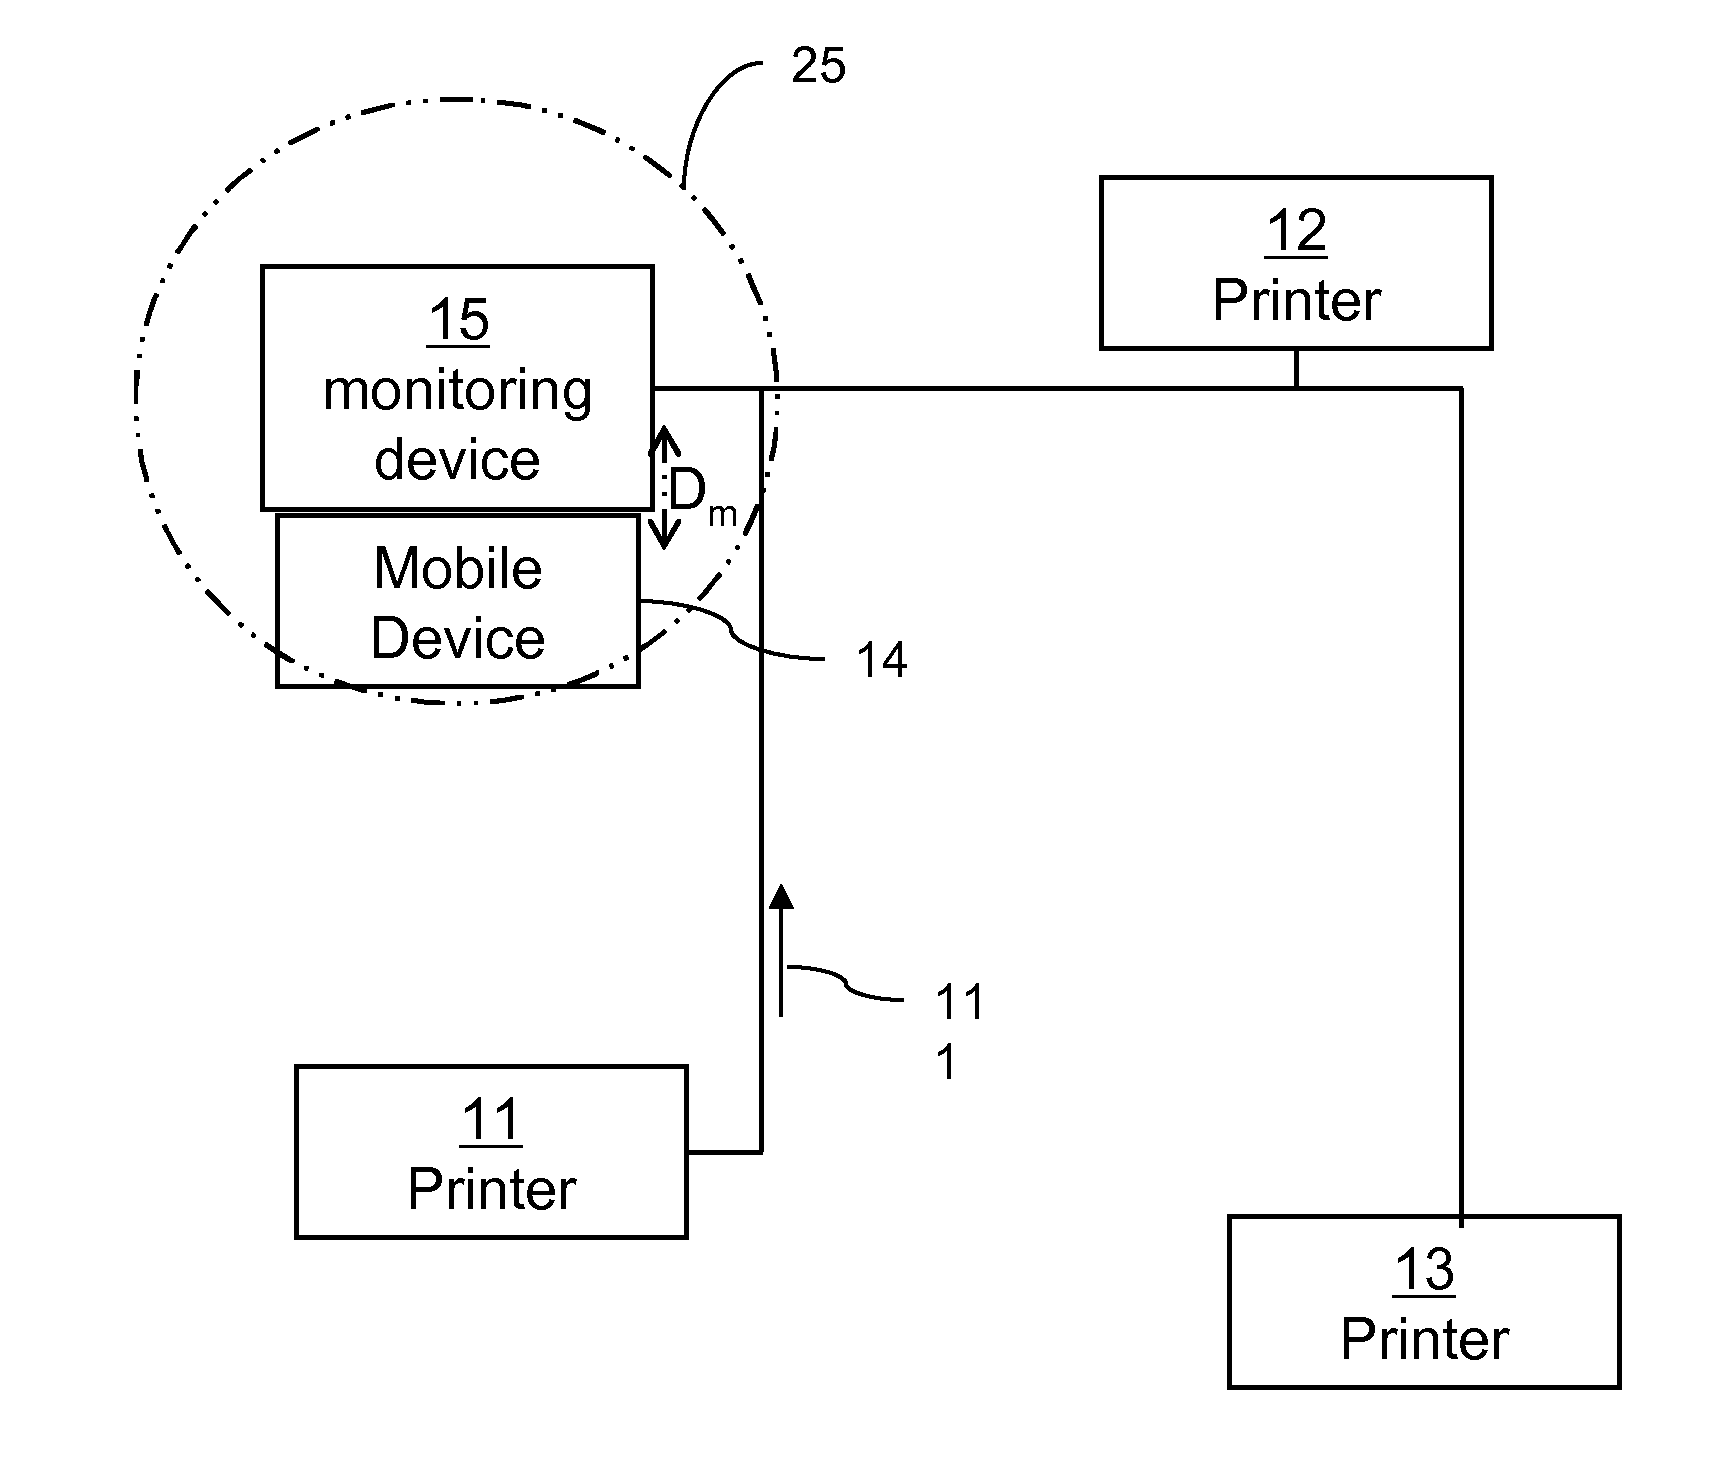 Method for managing a plurality of image processing devices